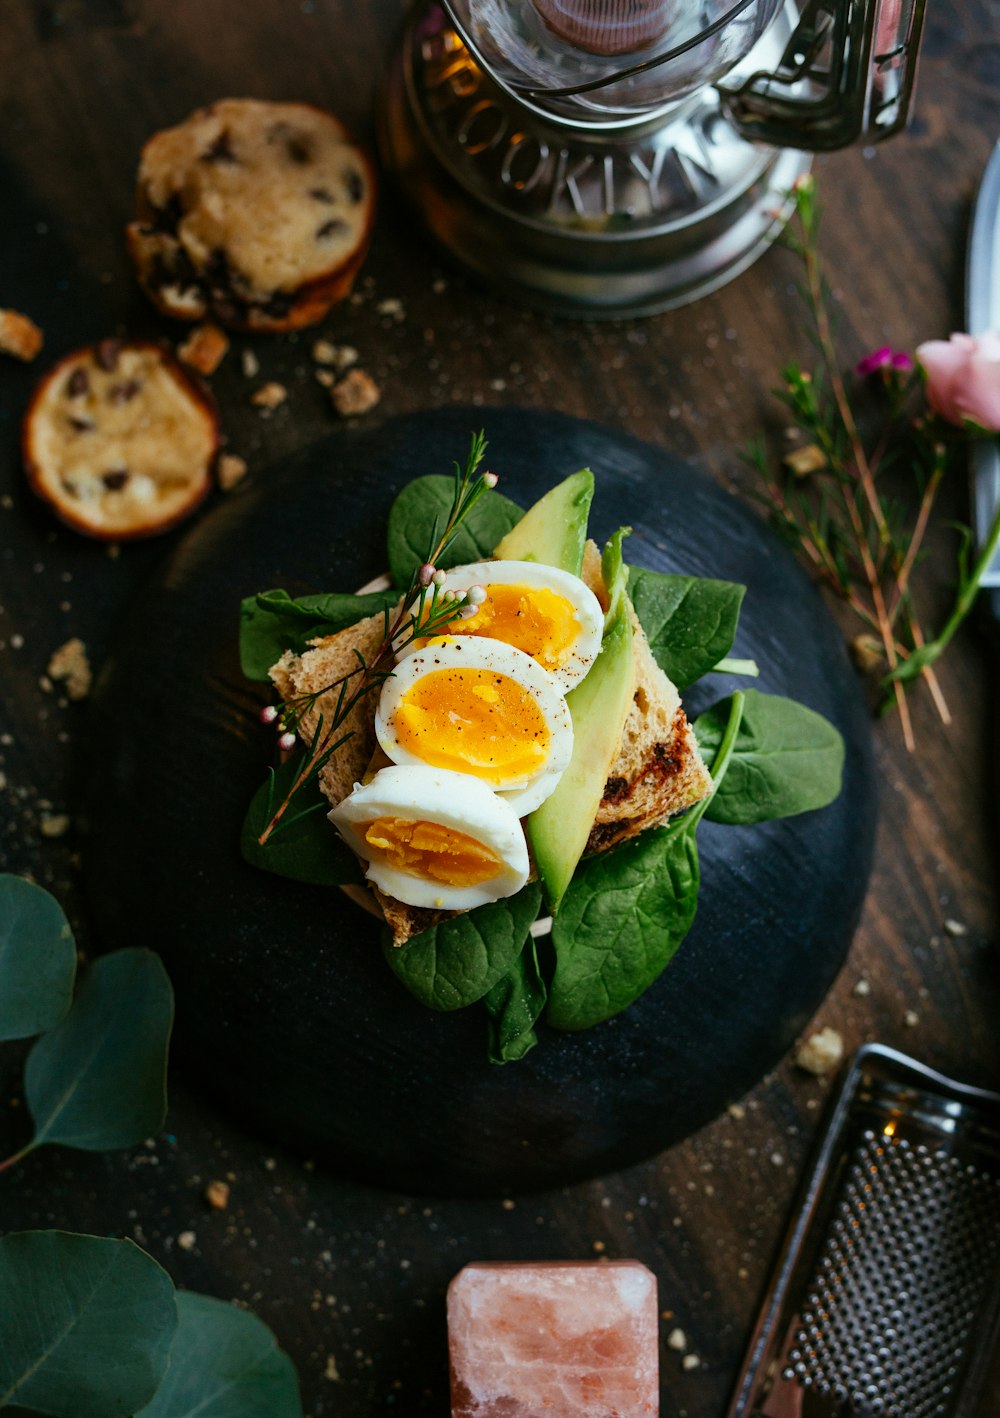 20+ Best Free Food Pictures on Unsplash